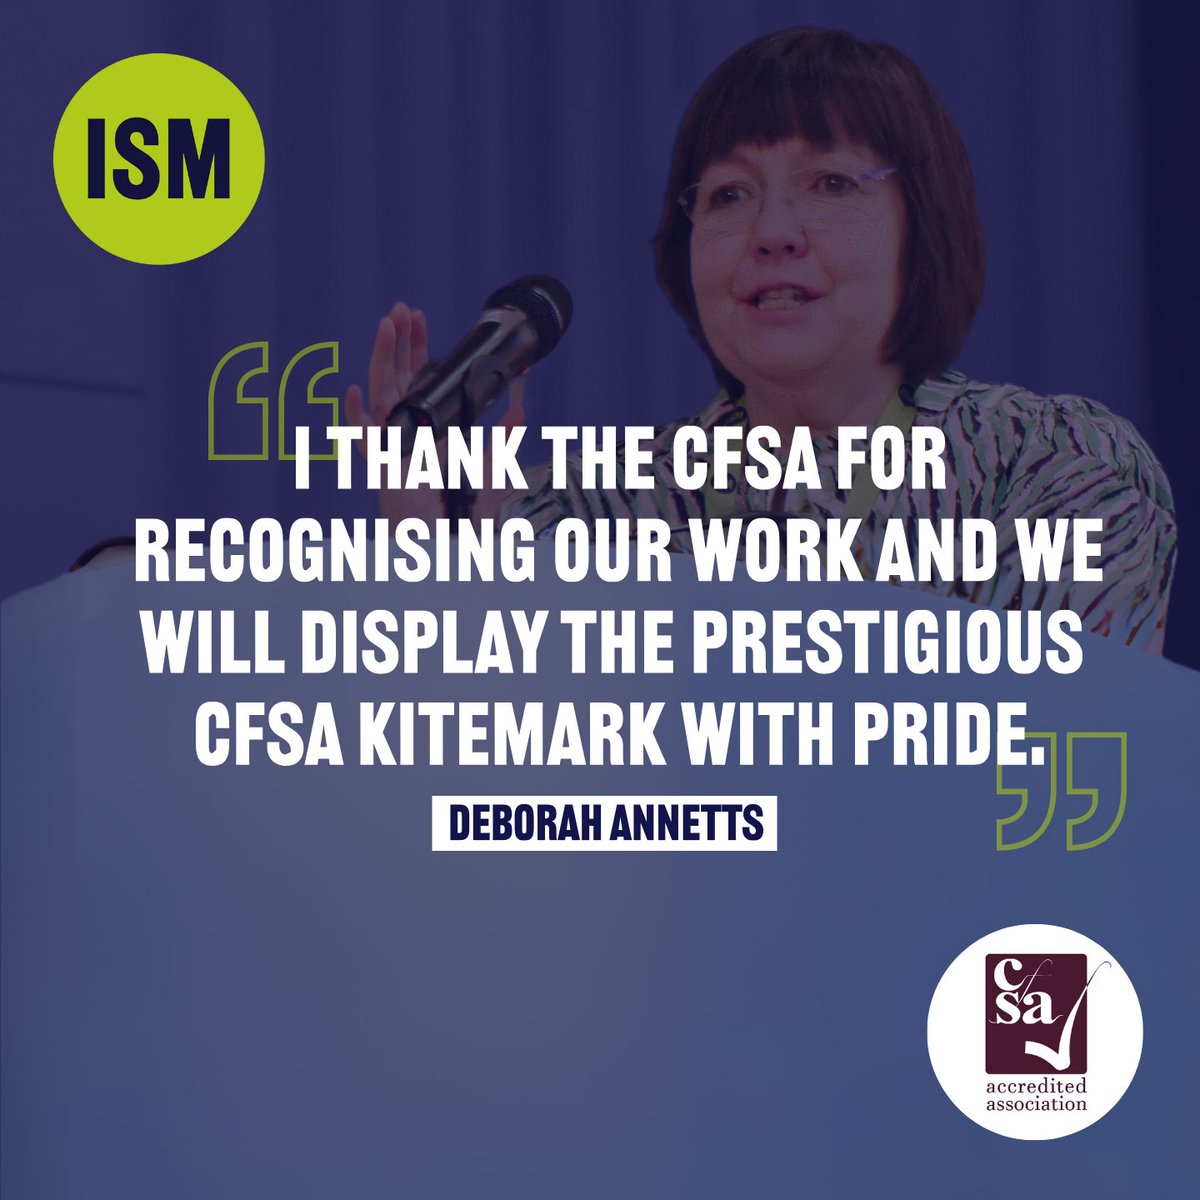 The ISM has been awarded a prestigious new kitemark by the Council for Subject Associations, recognising the ‘exemplary work’ we do as a subject association. 👇 @C4Subject_Assoc loom.ly/KlljJpk